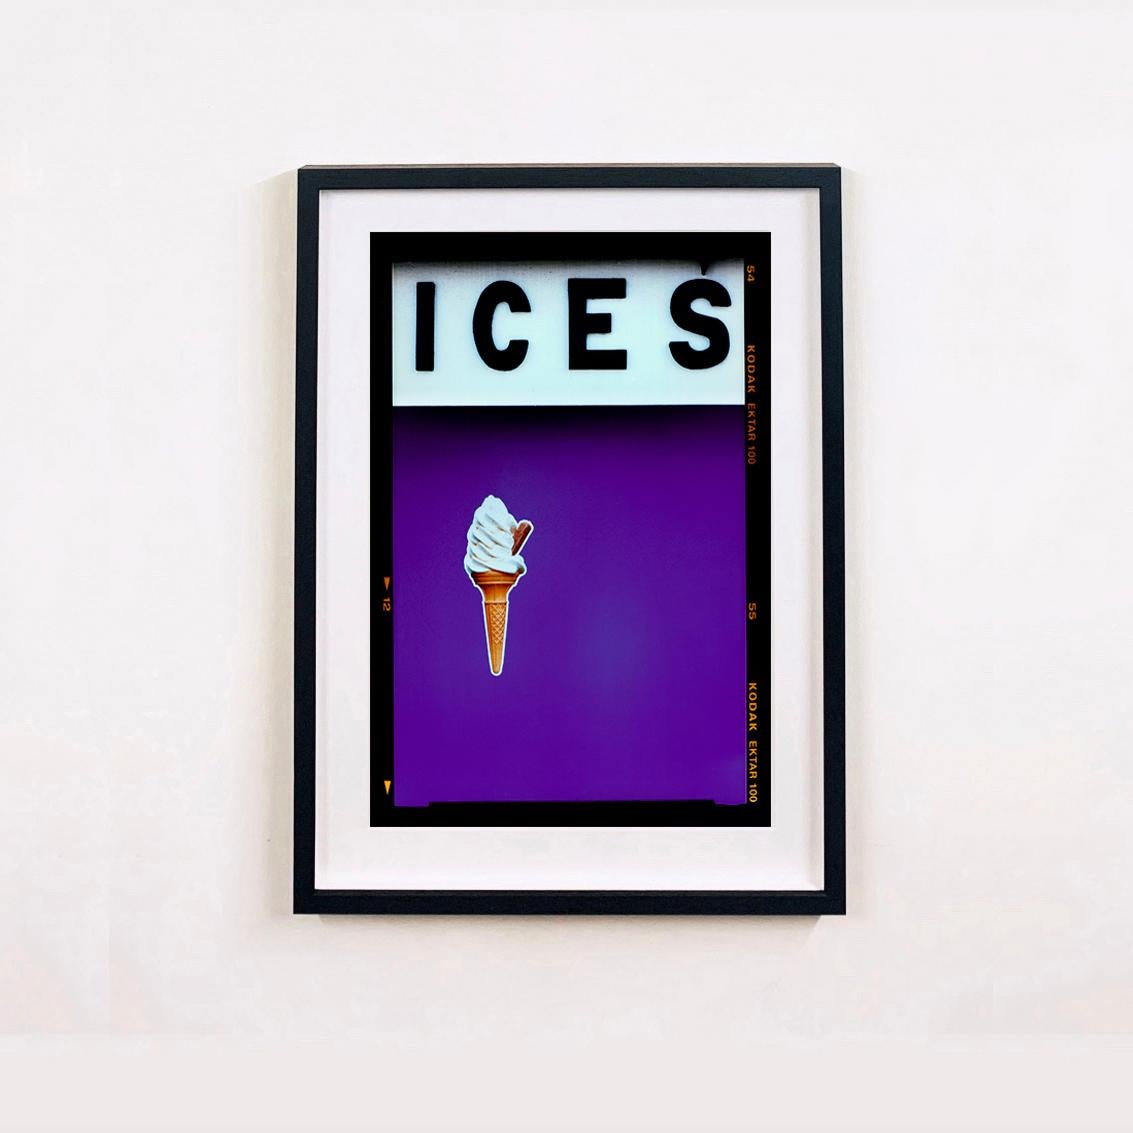 Ices (Purple), Bexhill-on-Sea - British seaside color photography - Print by Richard Heeps